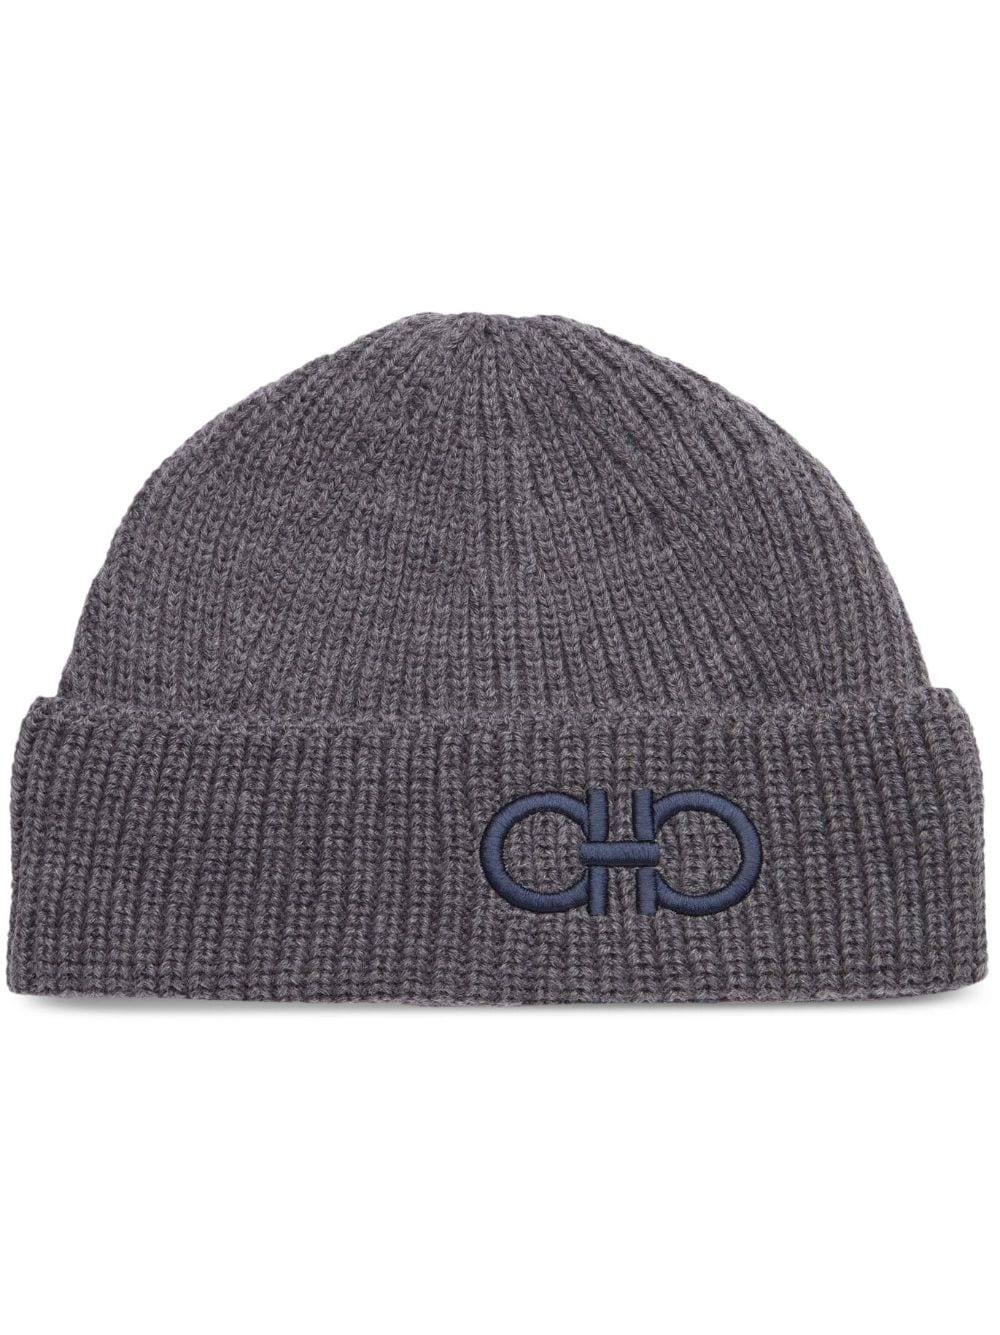 embroidered-logo knit wool beanie